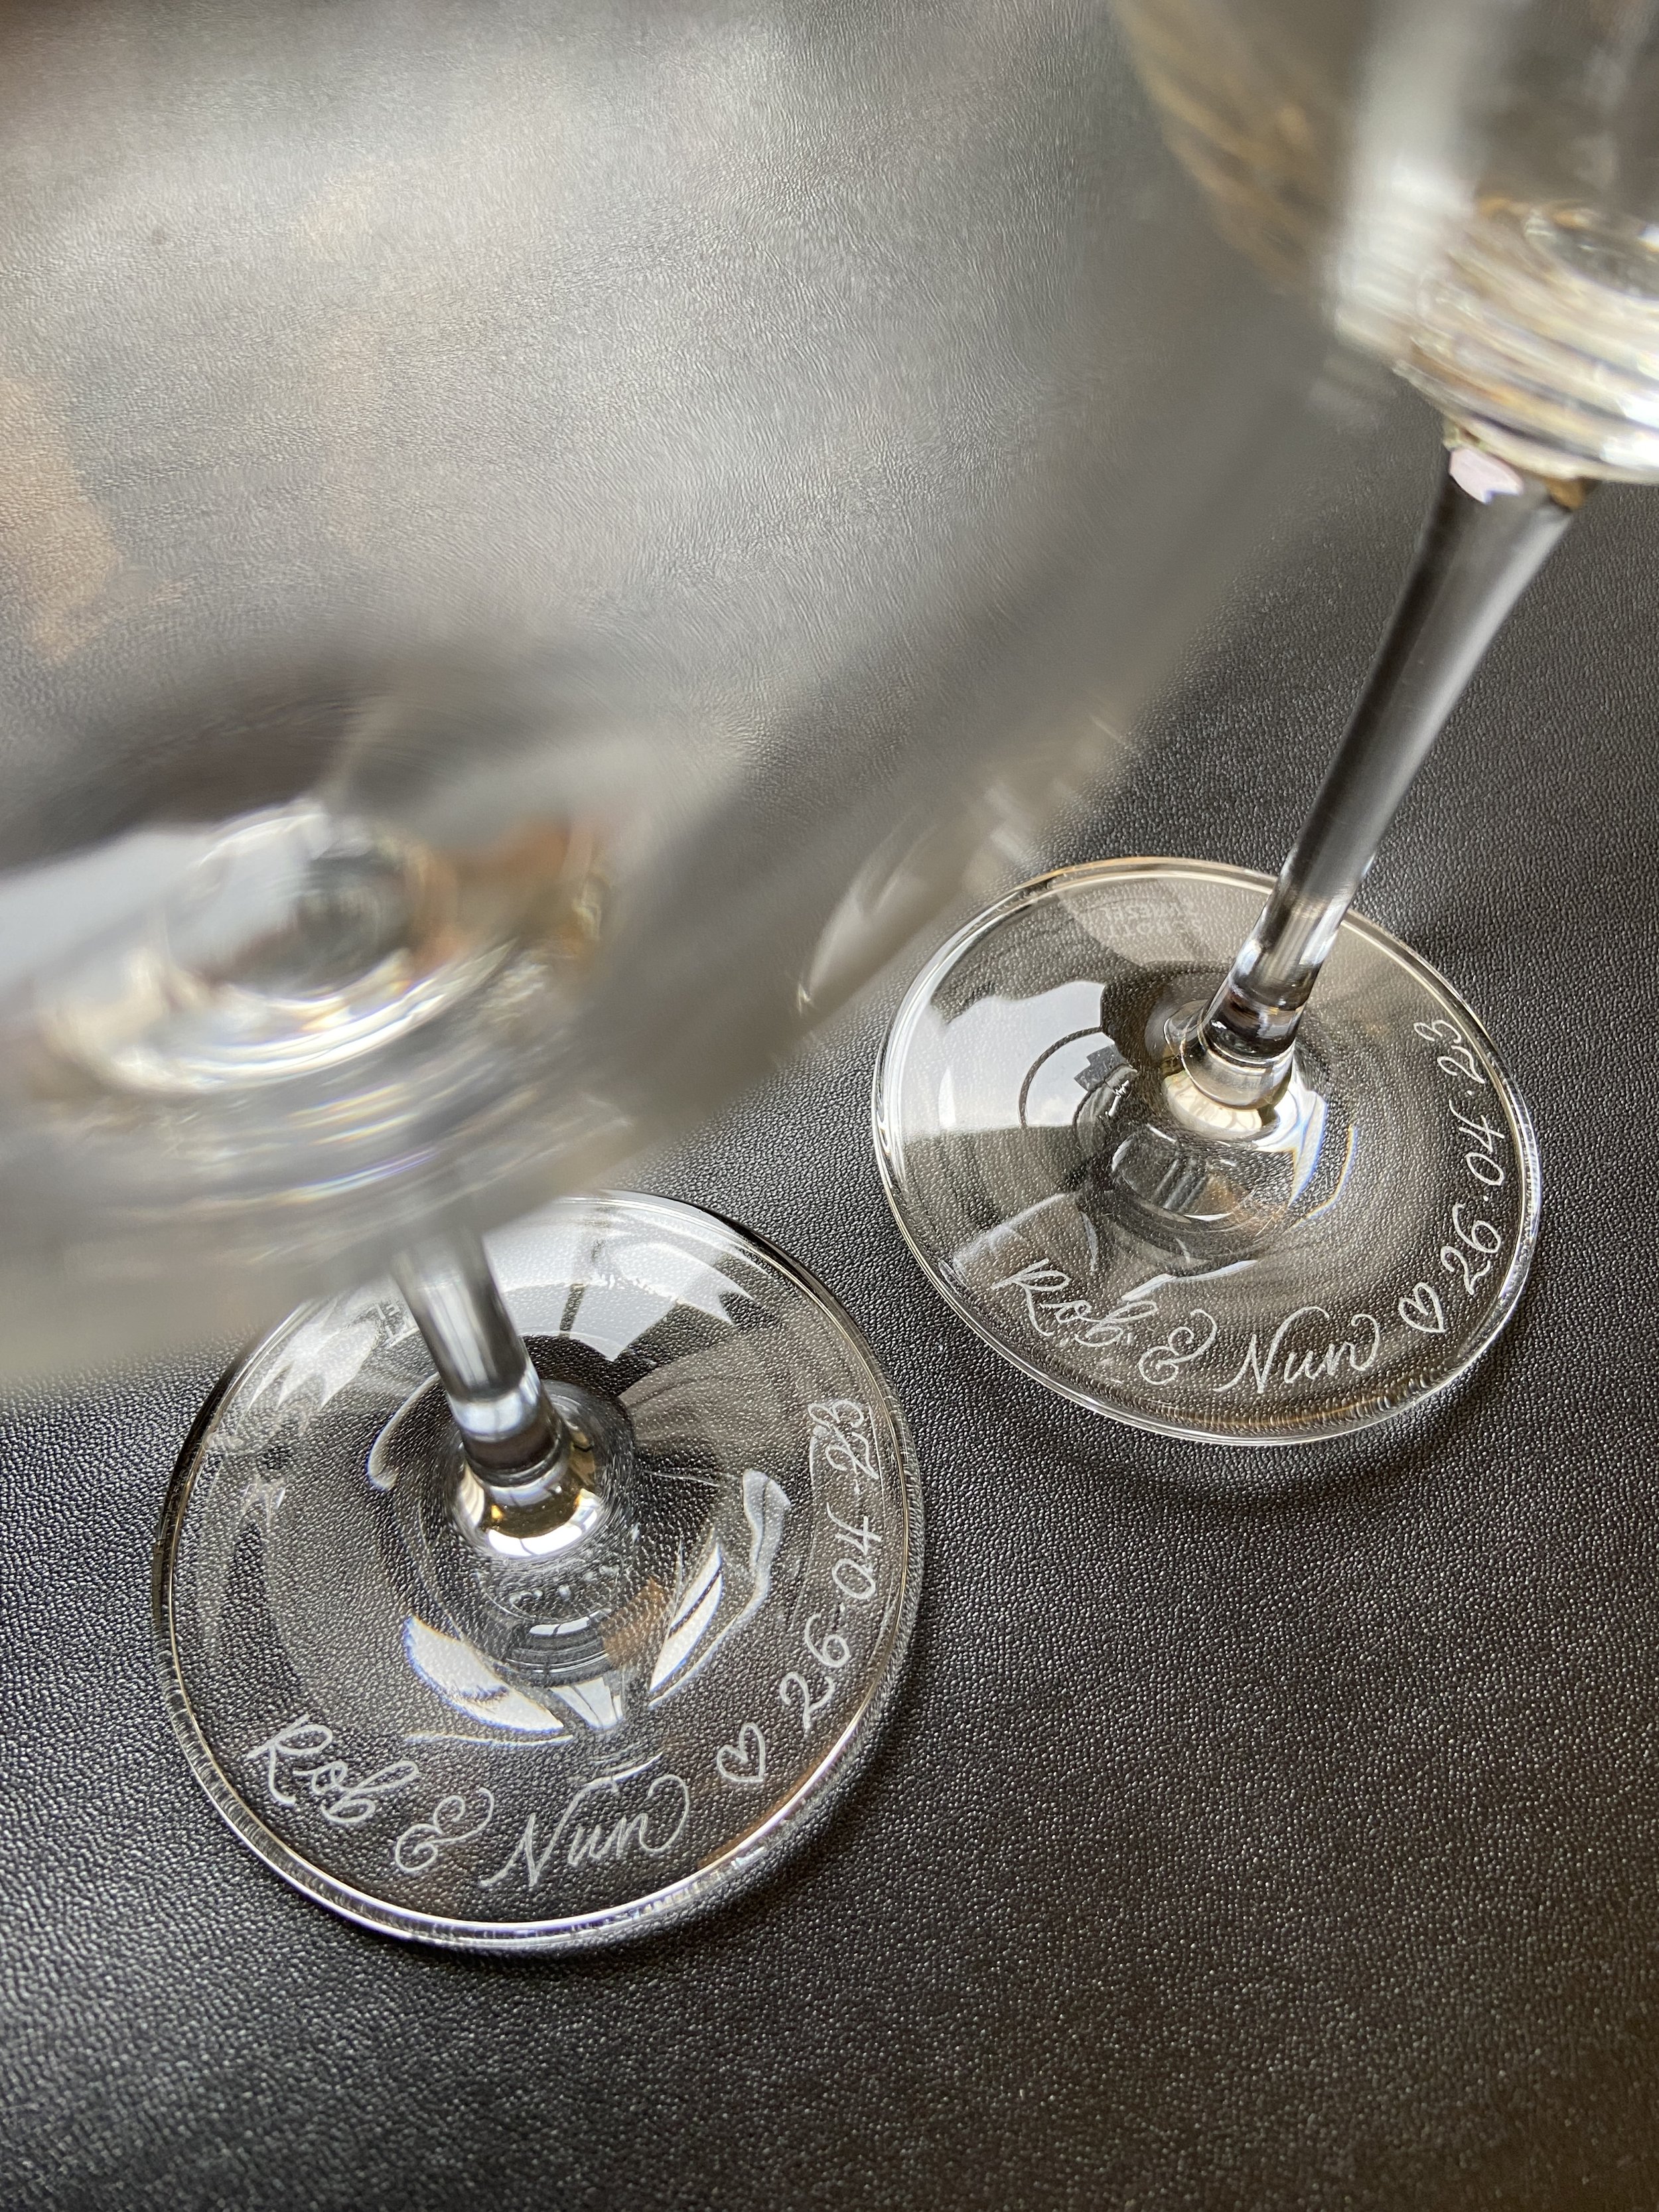 Engraved Wedding Couple & Date on Glasses